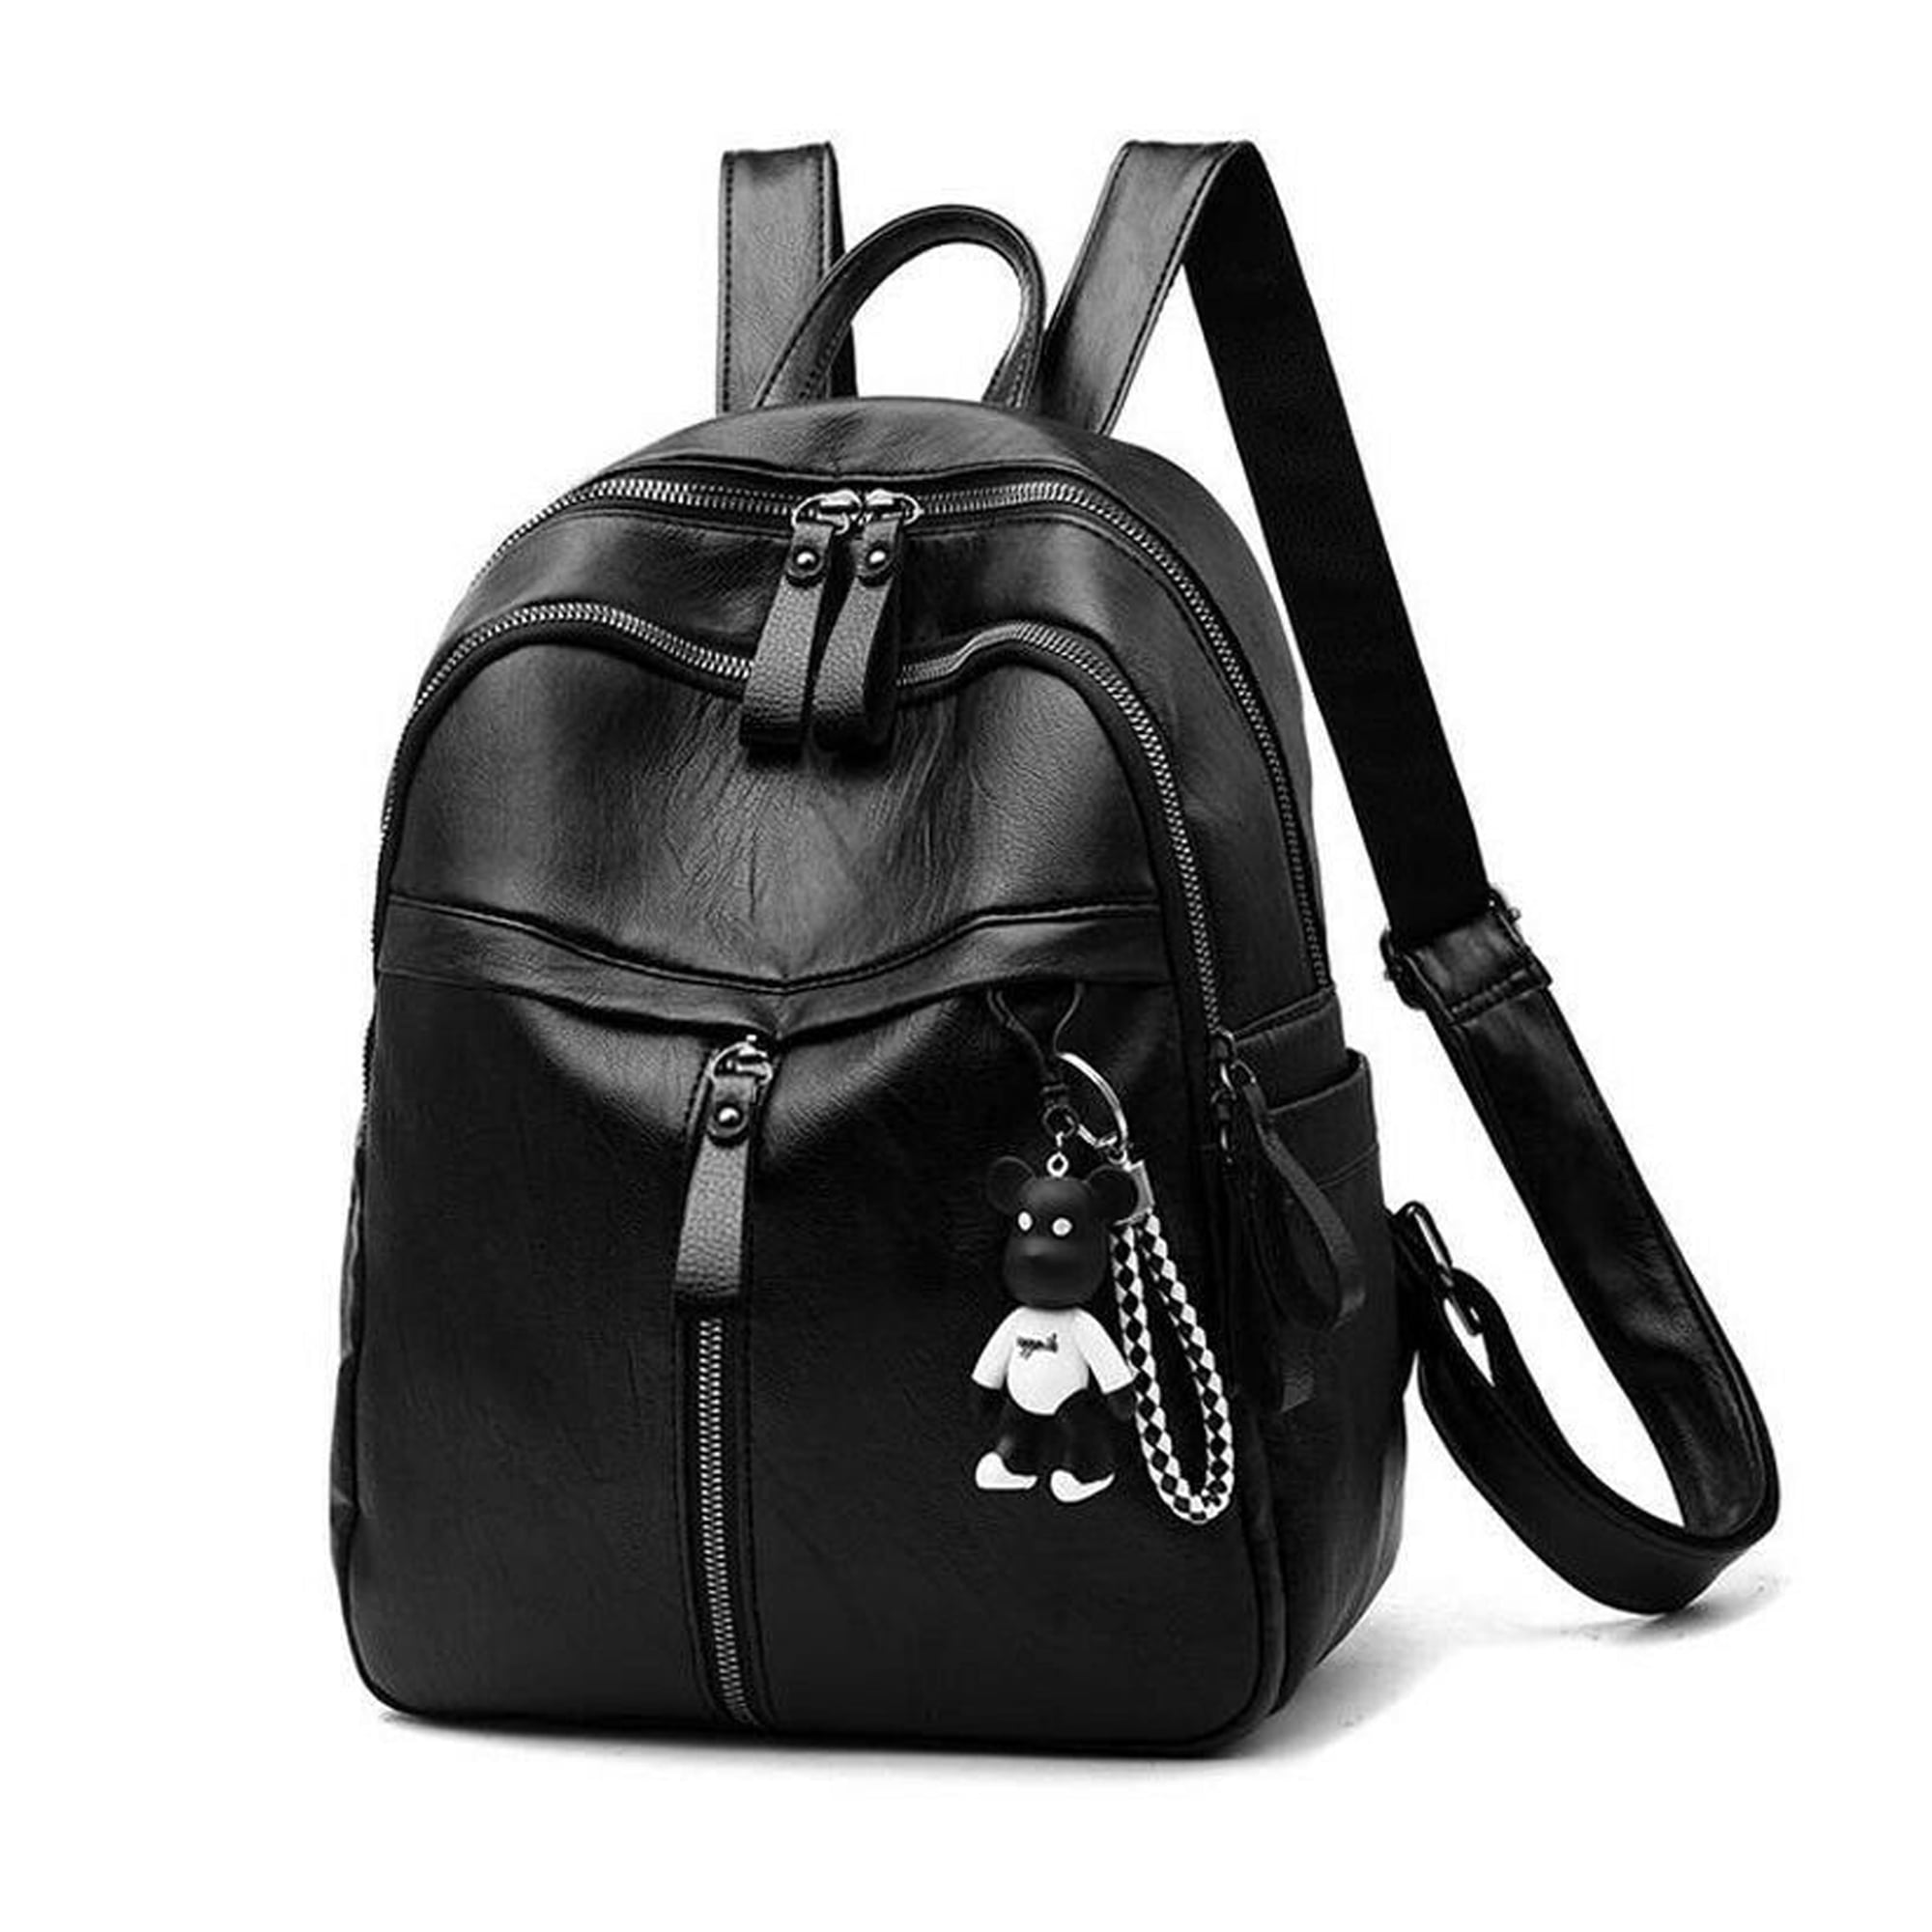 heaven2017 Black Oxford Cloth Rivets Travel School Campus Backpack for Women